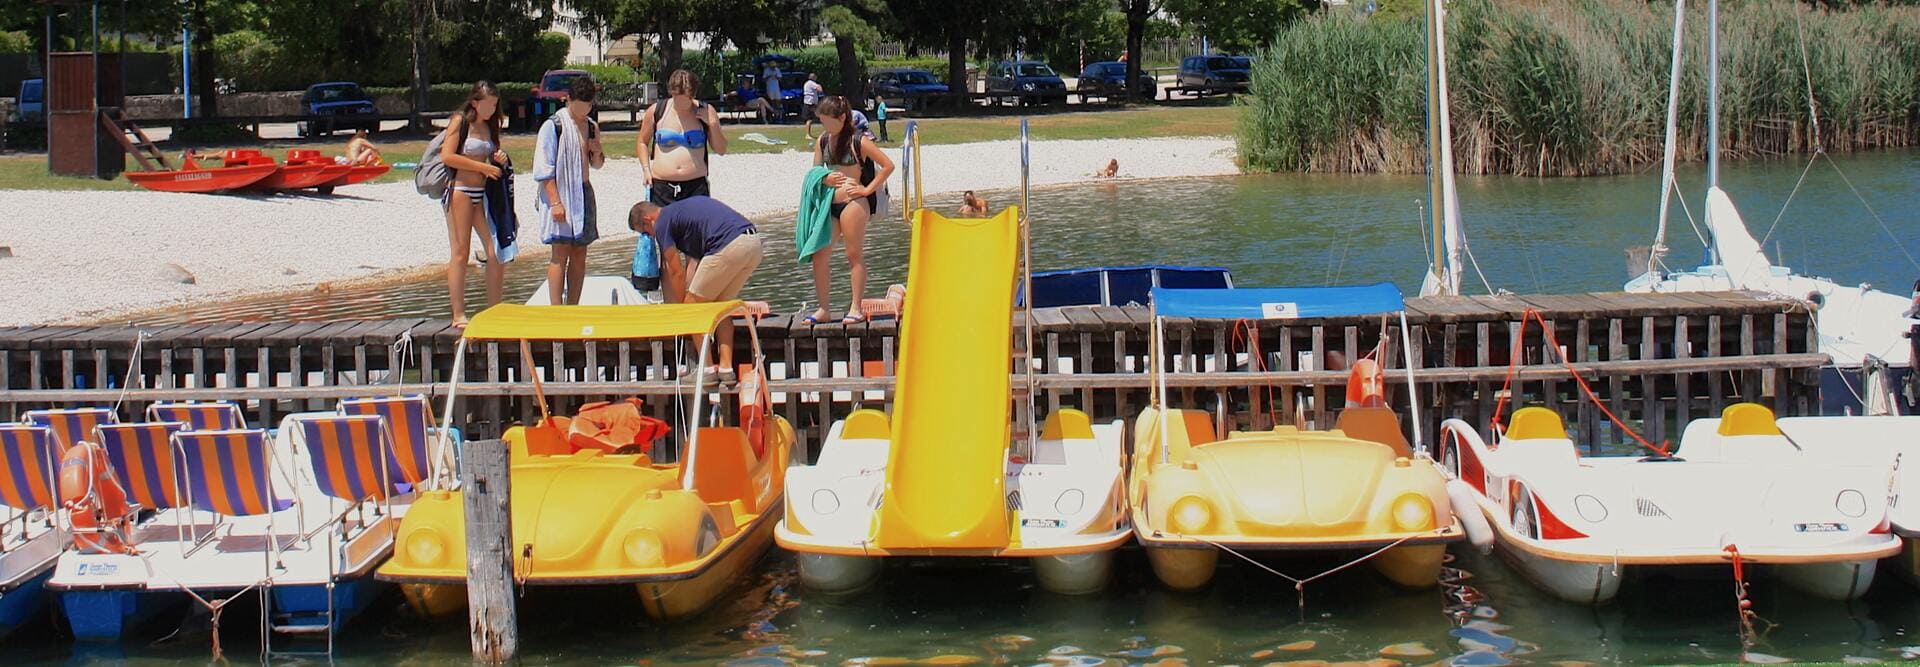 pedalboats at the pieri